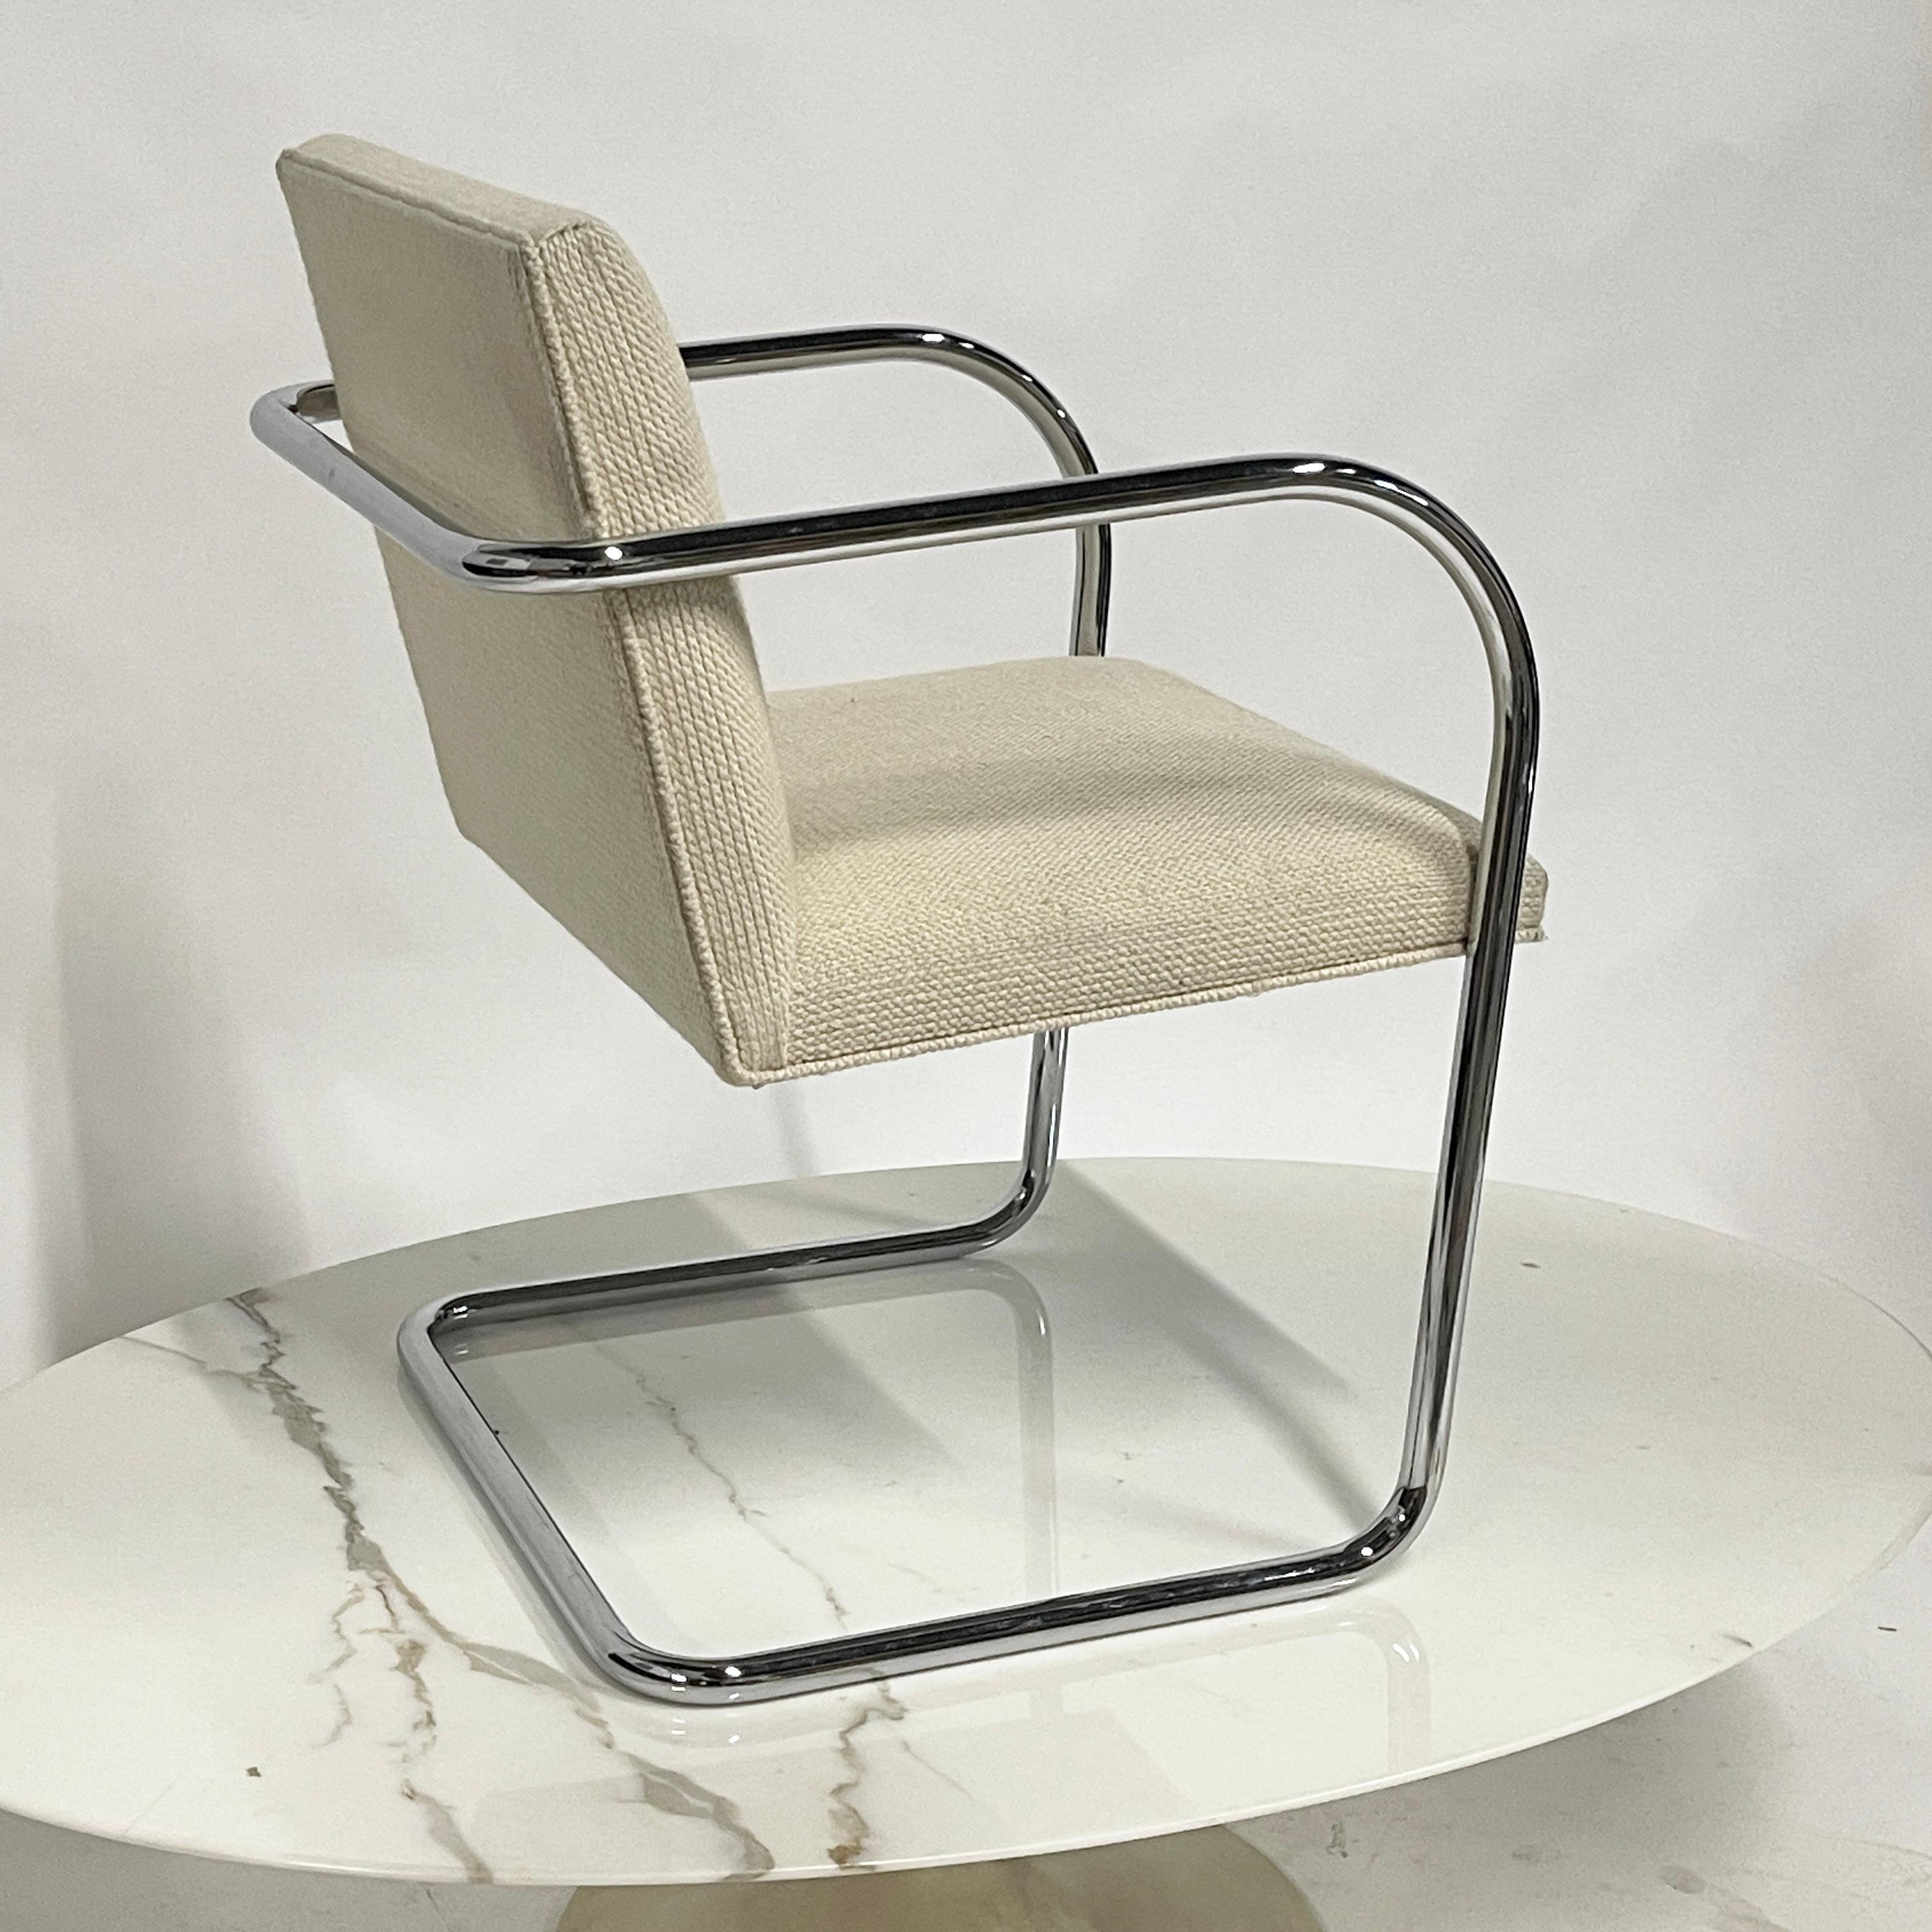 Steel Mies Van Der Rohe for Knoll Brno Chair in Cato Upholstery 60 available For Sale